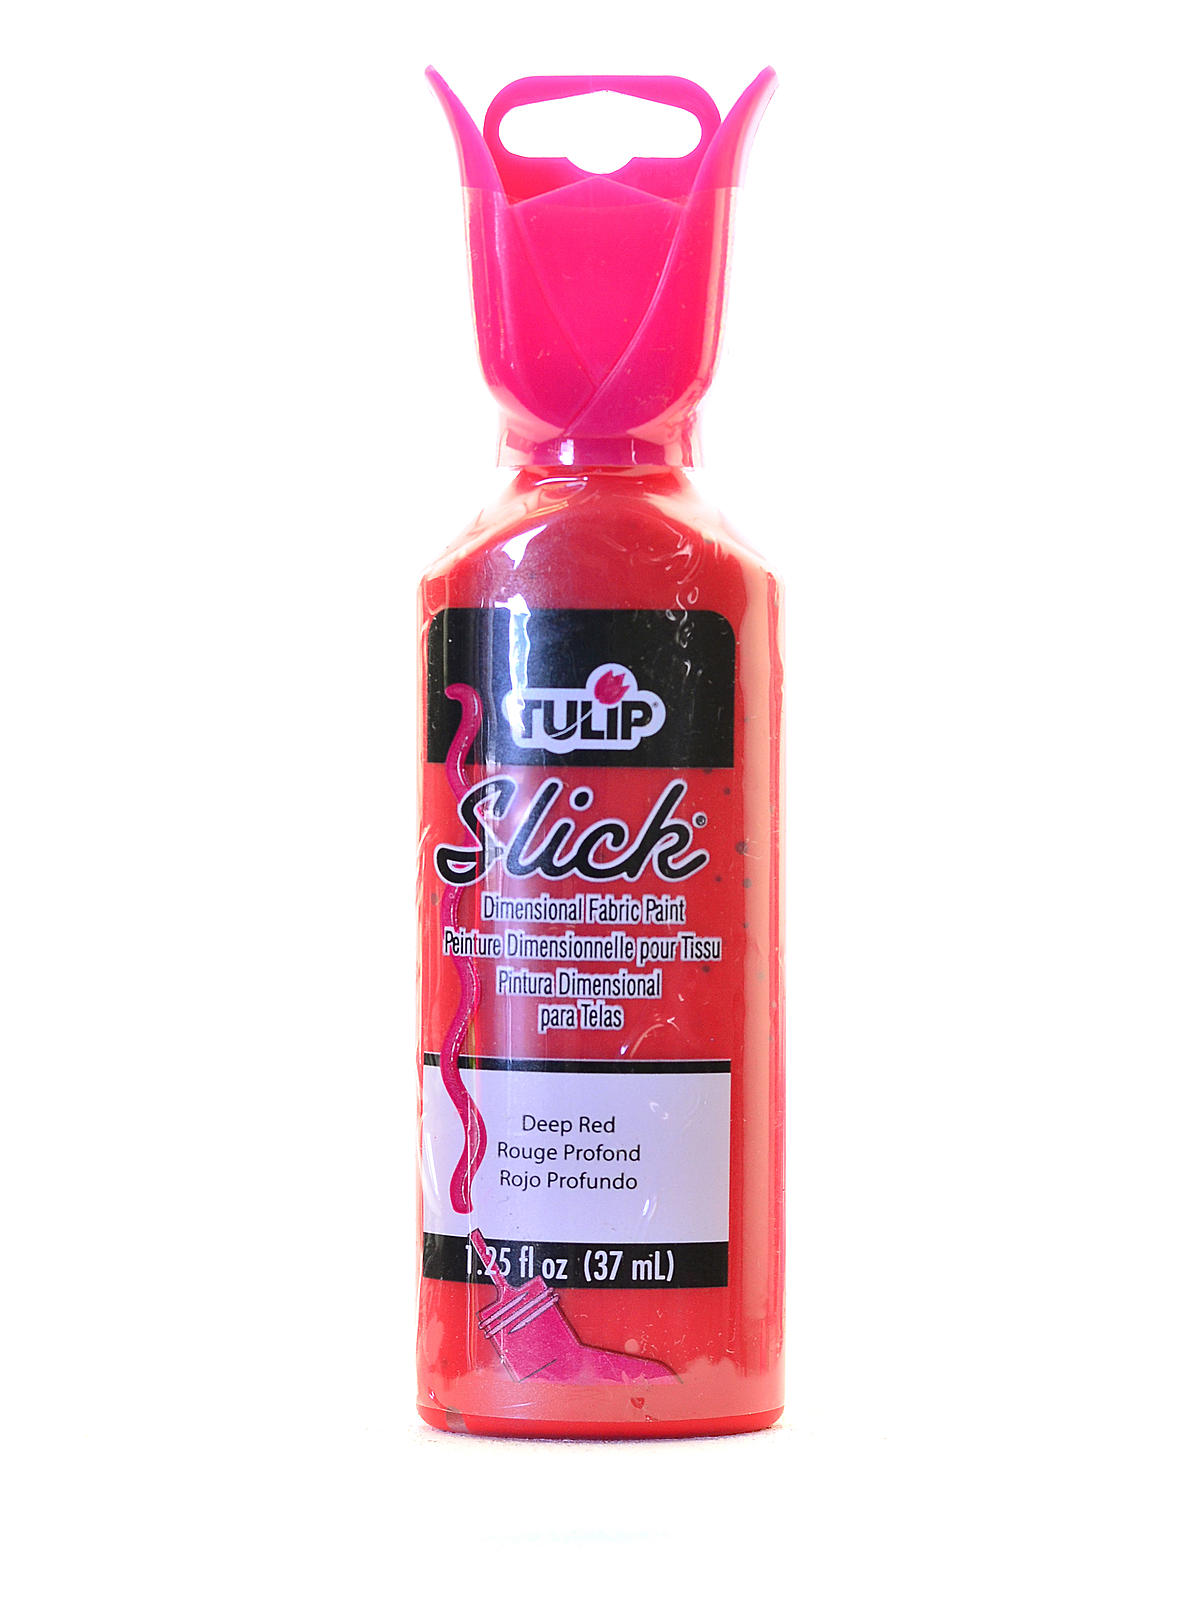 Slick Dimensional Fabric Paint Deep Red 1 1 4 Oz.